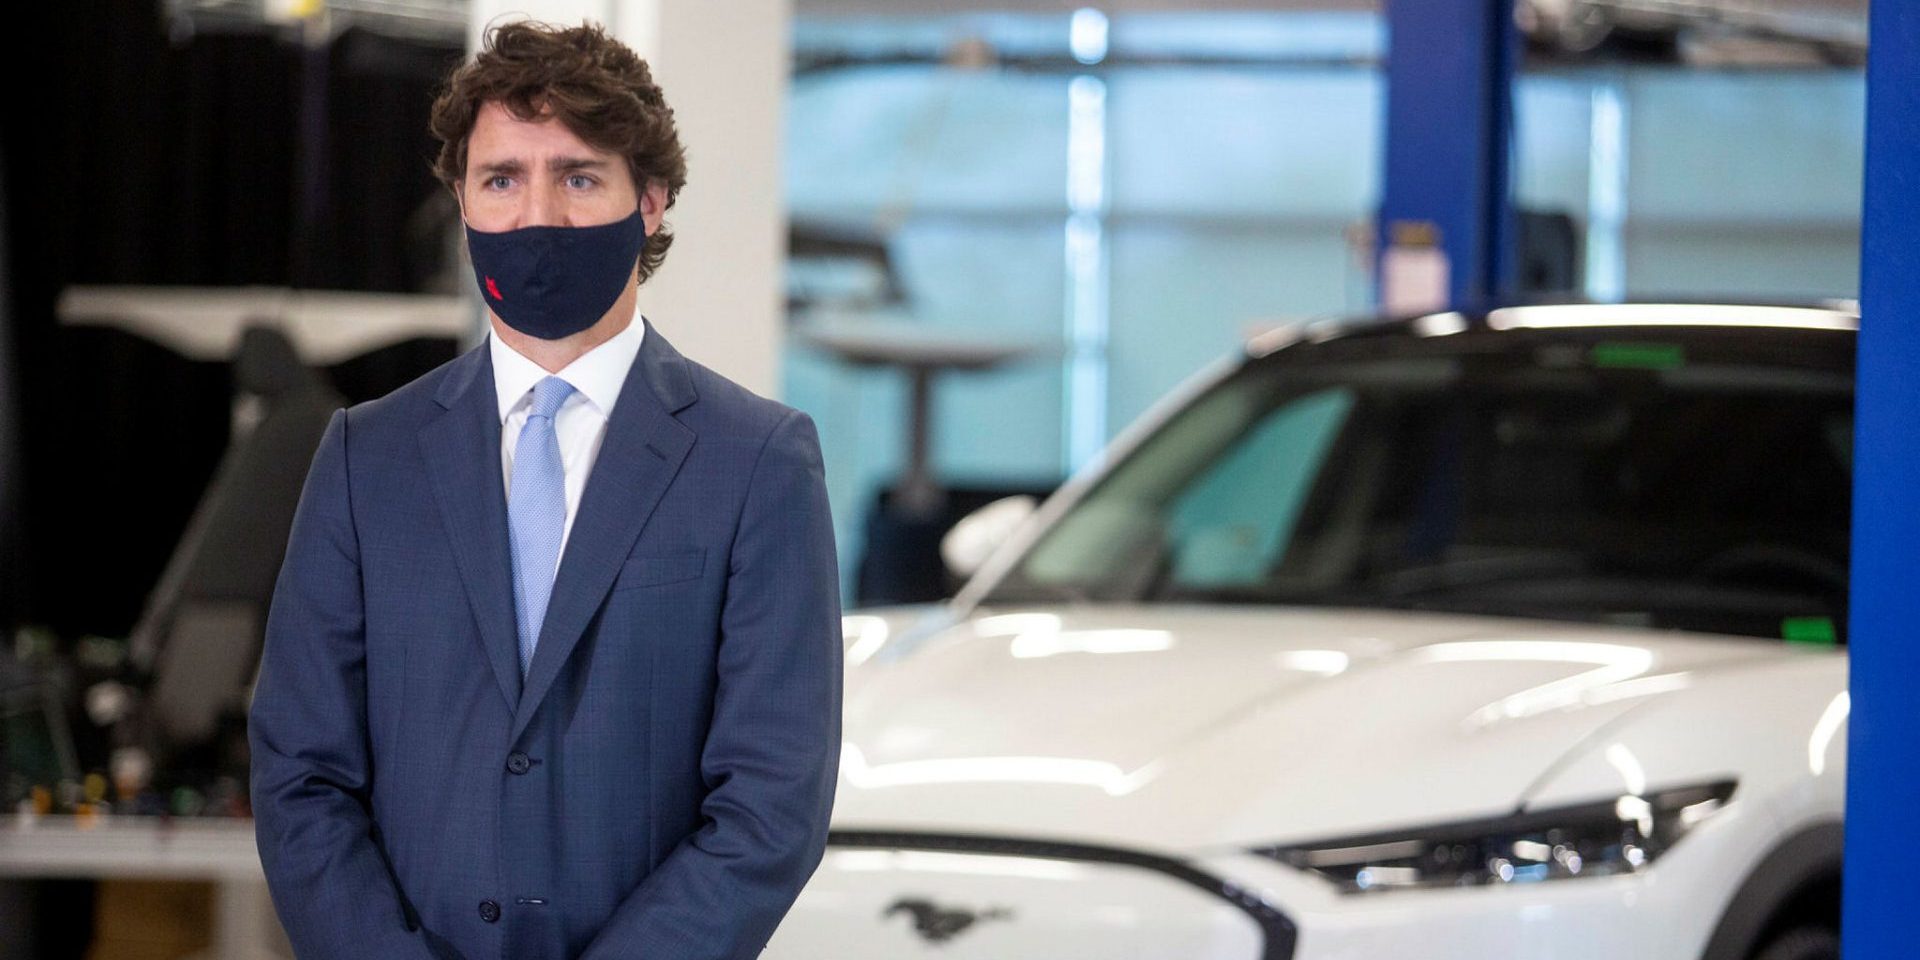 Prime Minister Justin Trudeau attends a press conference at the Ford Connectivity and Innovation Centre in Ottawa on Oct. 8, 2020 to announce the retooling of the Oakville Ford assembly plant to produce electric vehicles. The Hill Times photograph by Andrew Meade